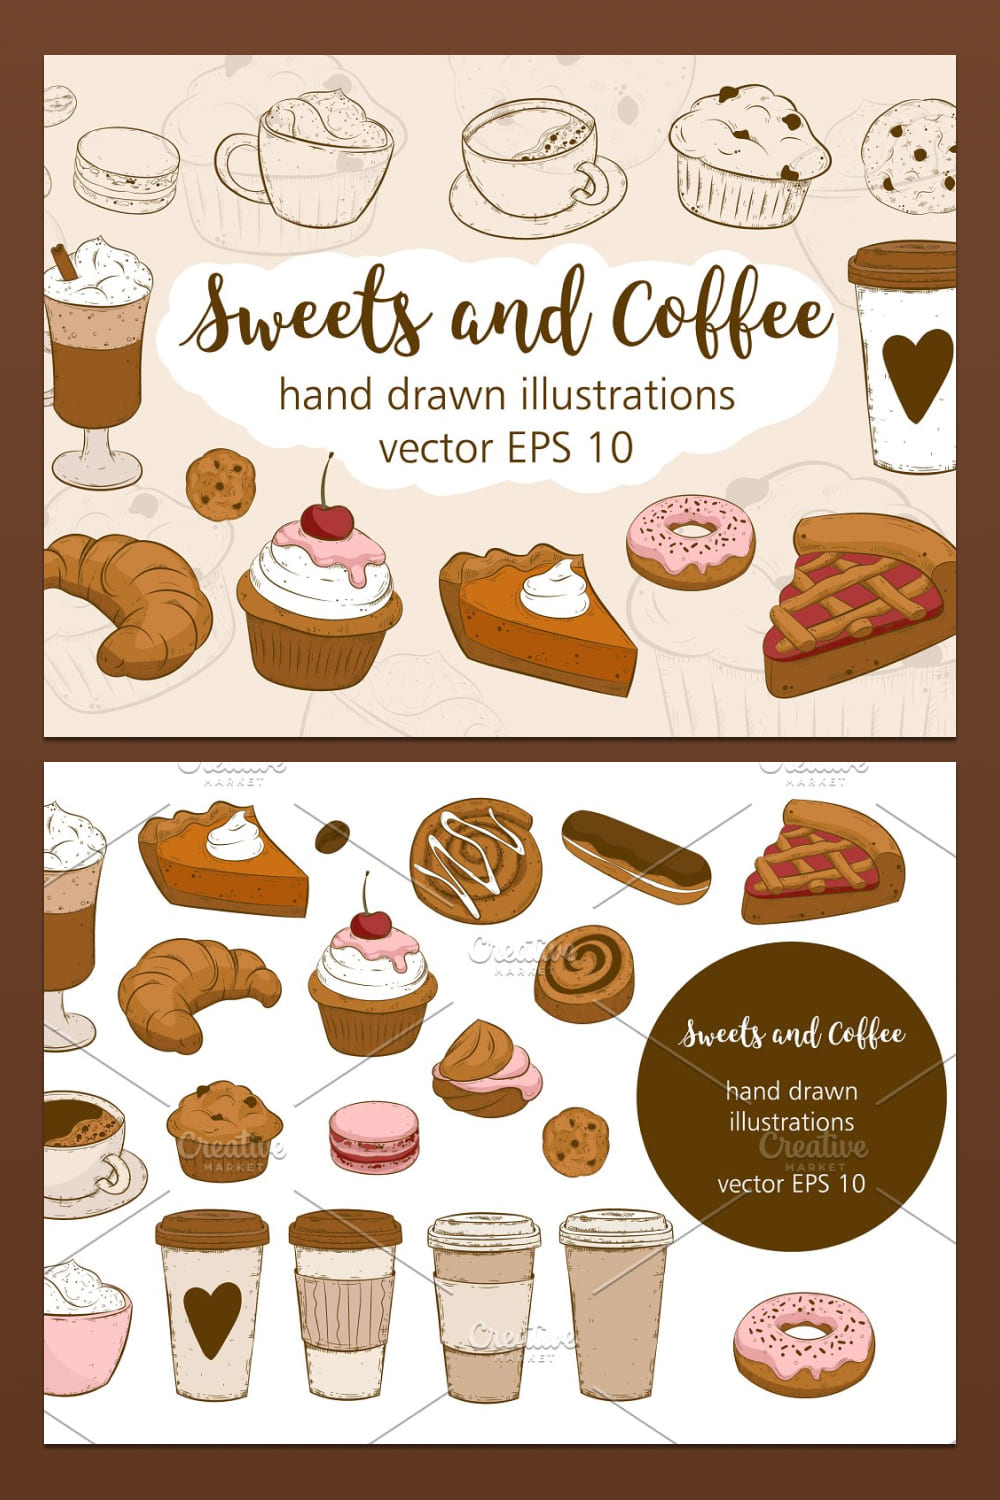 Sweets and coffee - pinterest image preview.